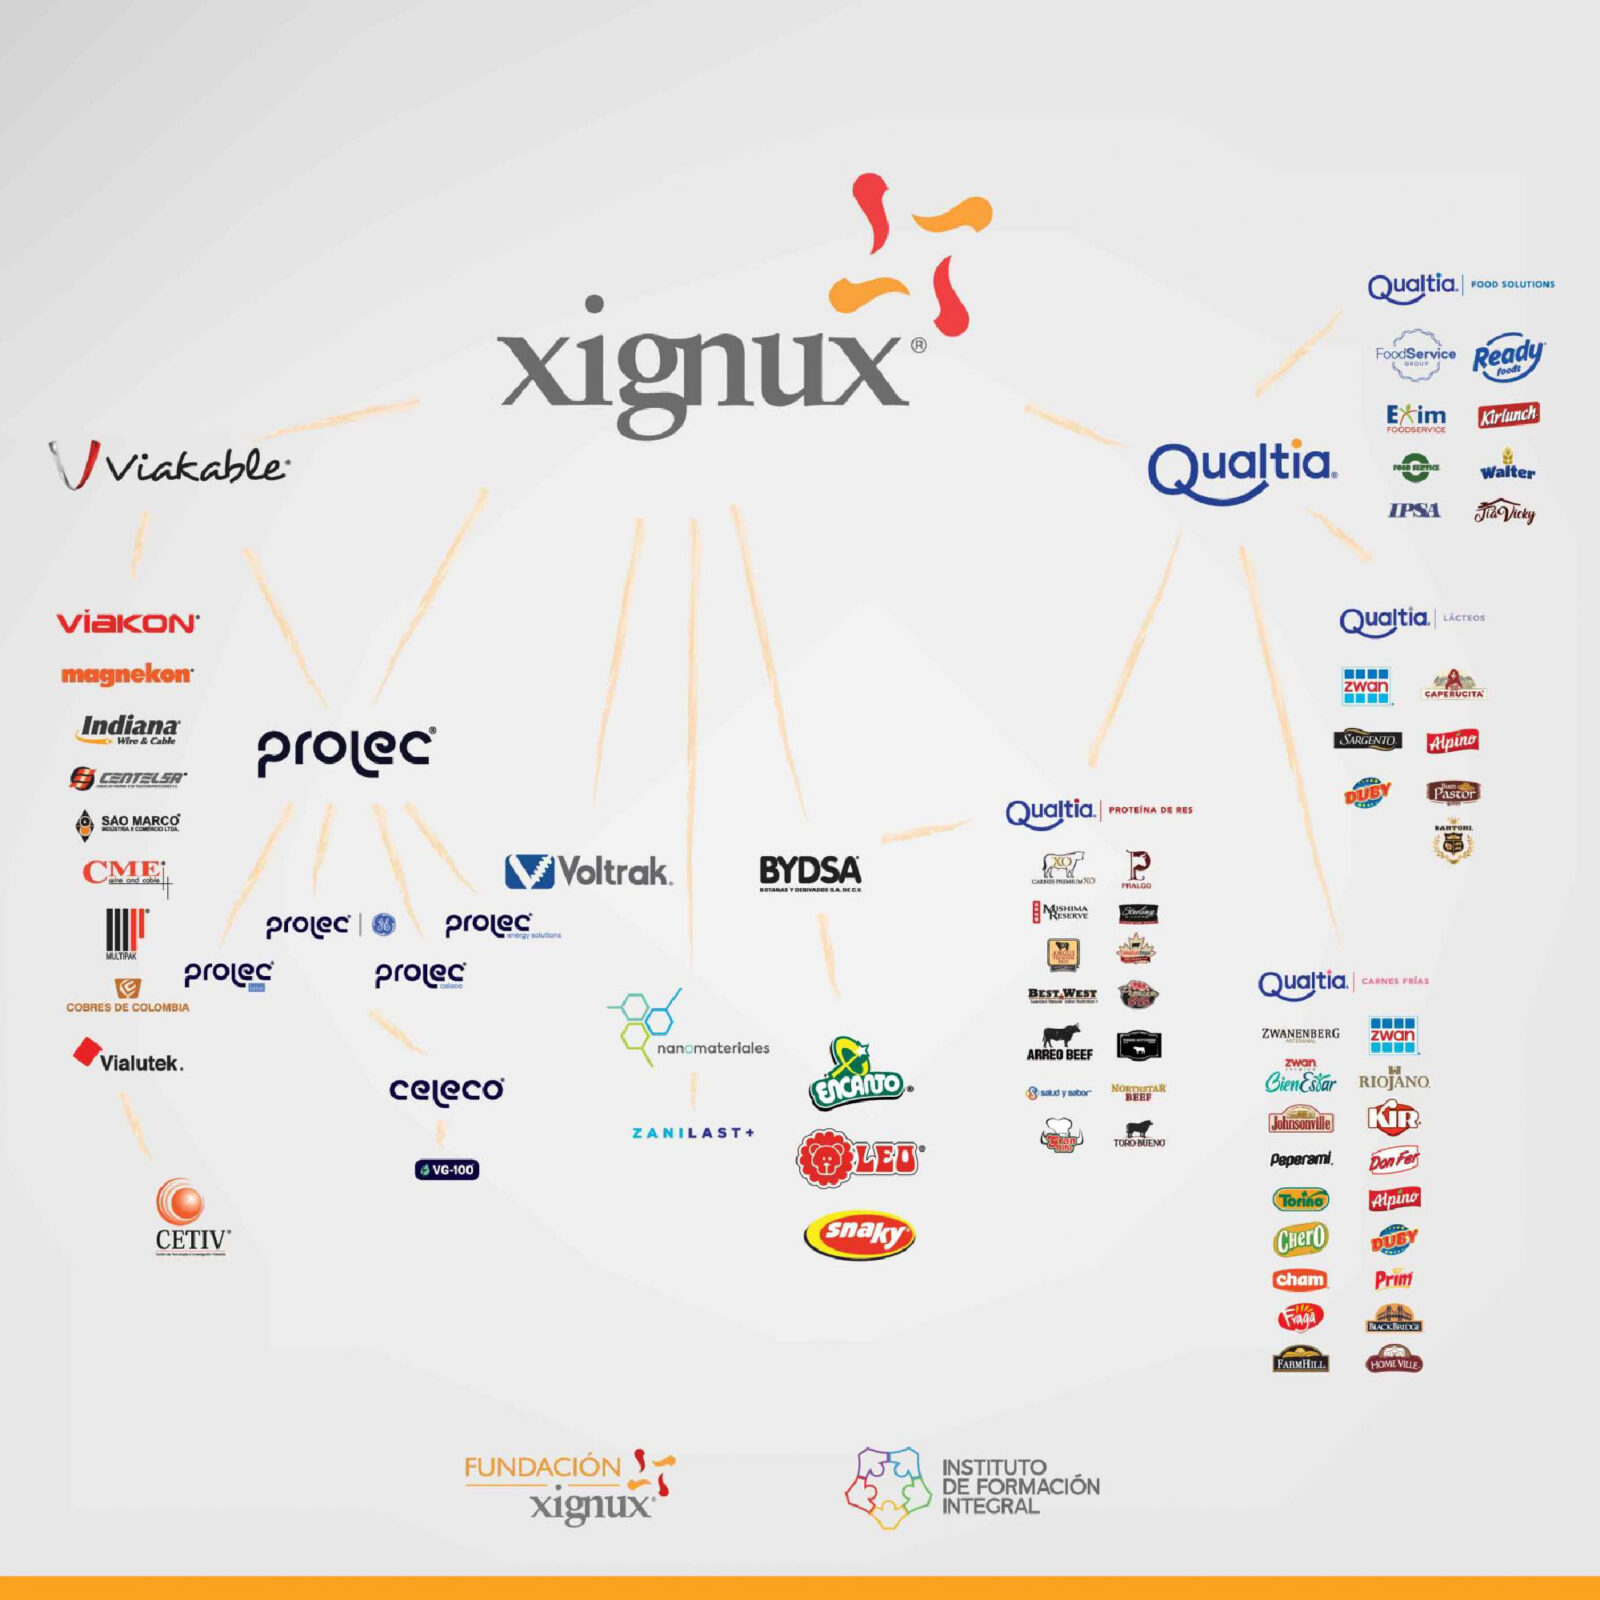 a company tree showing the break down of Xignux's subsidiaries